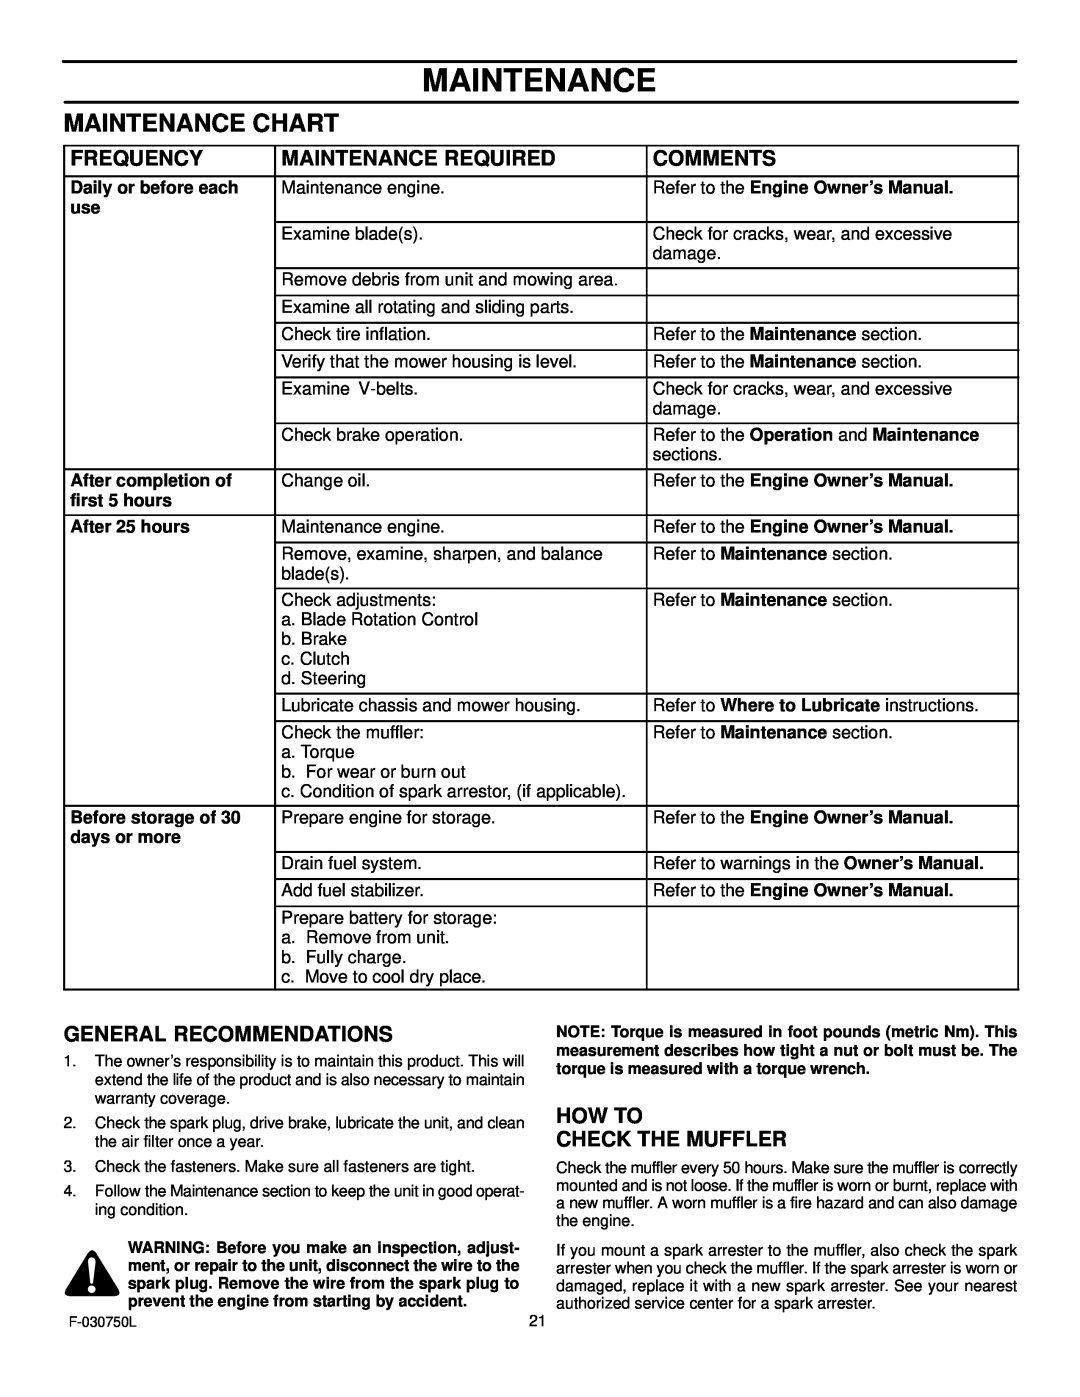 Murray 425306x48A manual Maintenance Chart, Frequency, Maintenance Required, Comments, General Recommendations 